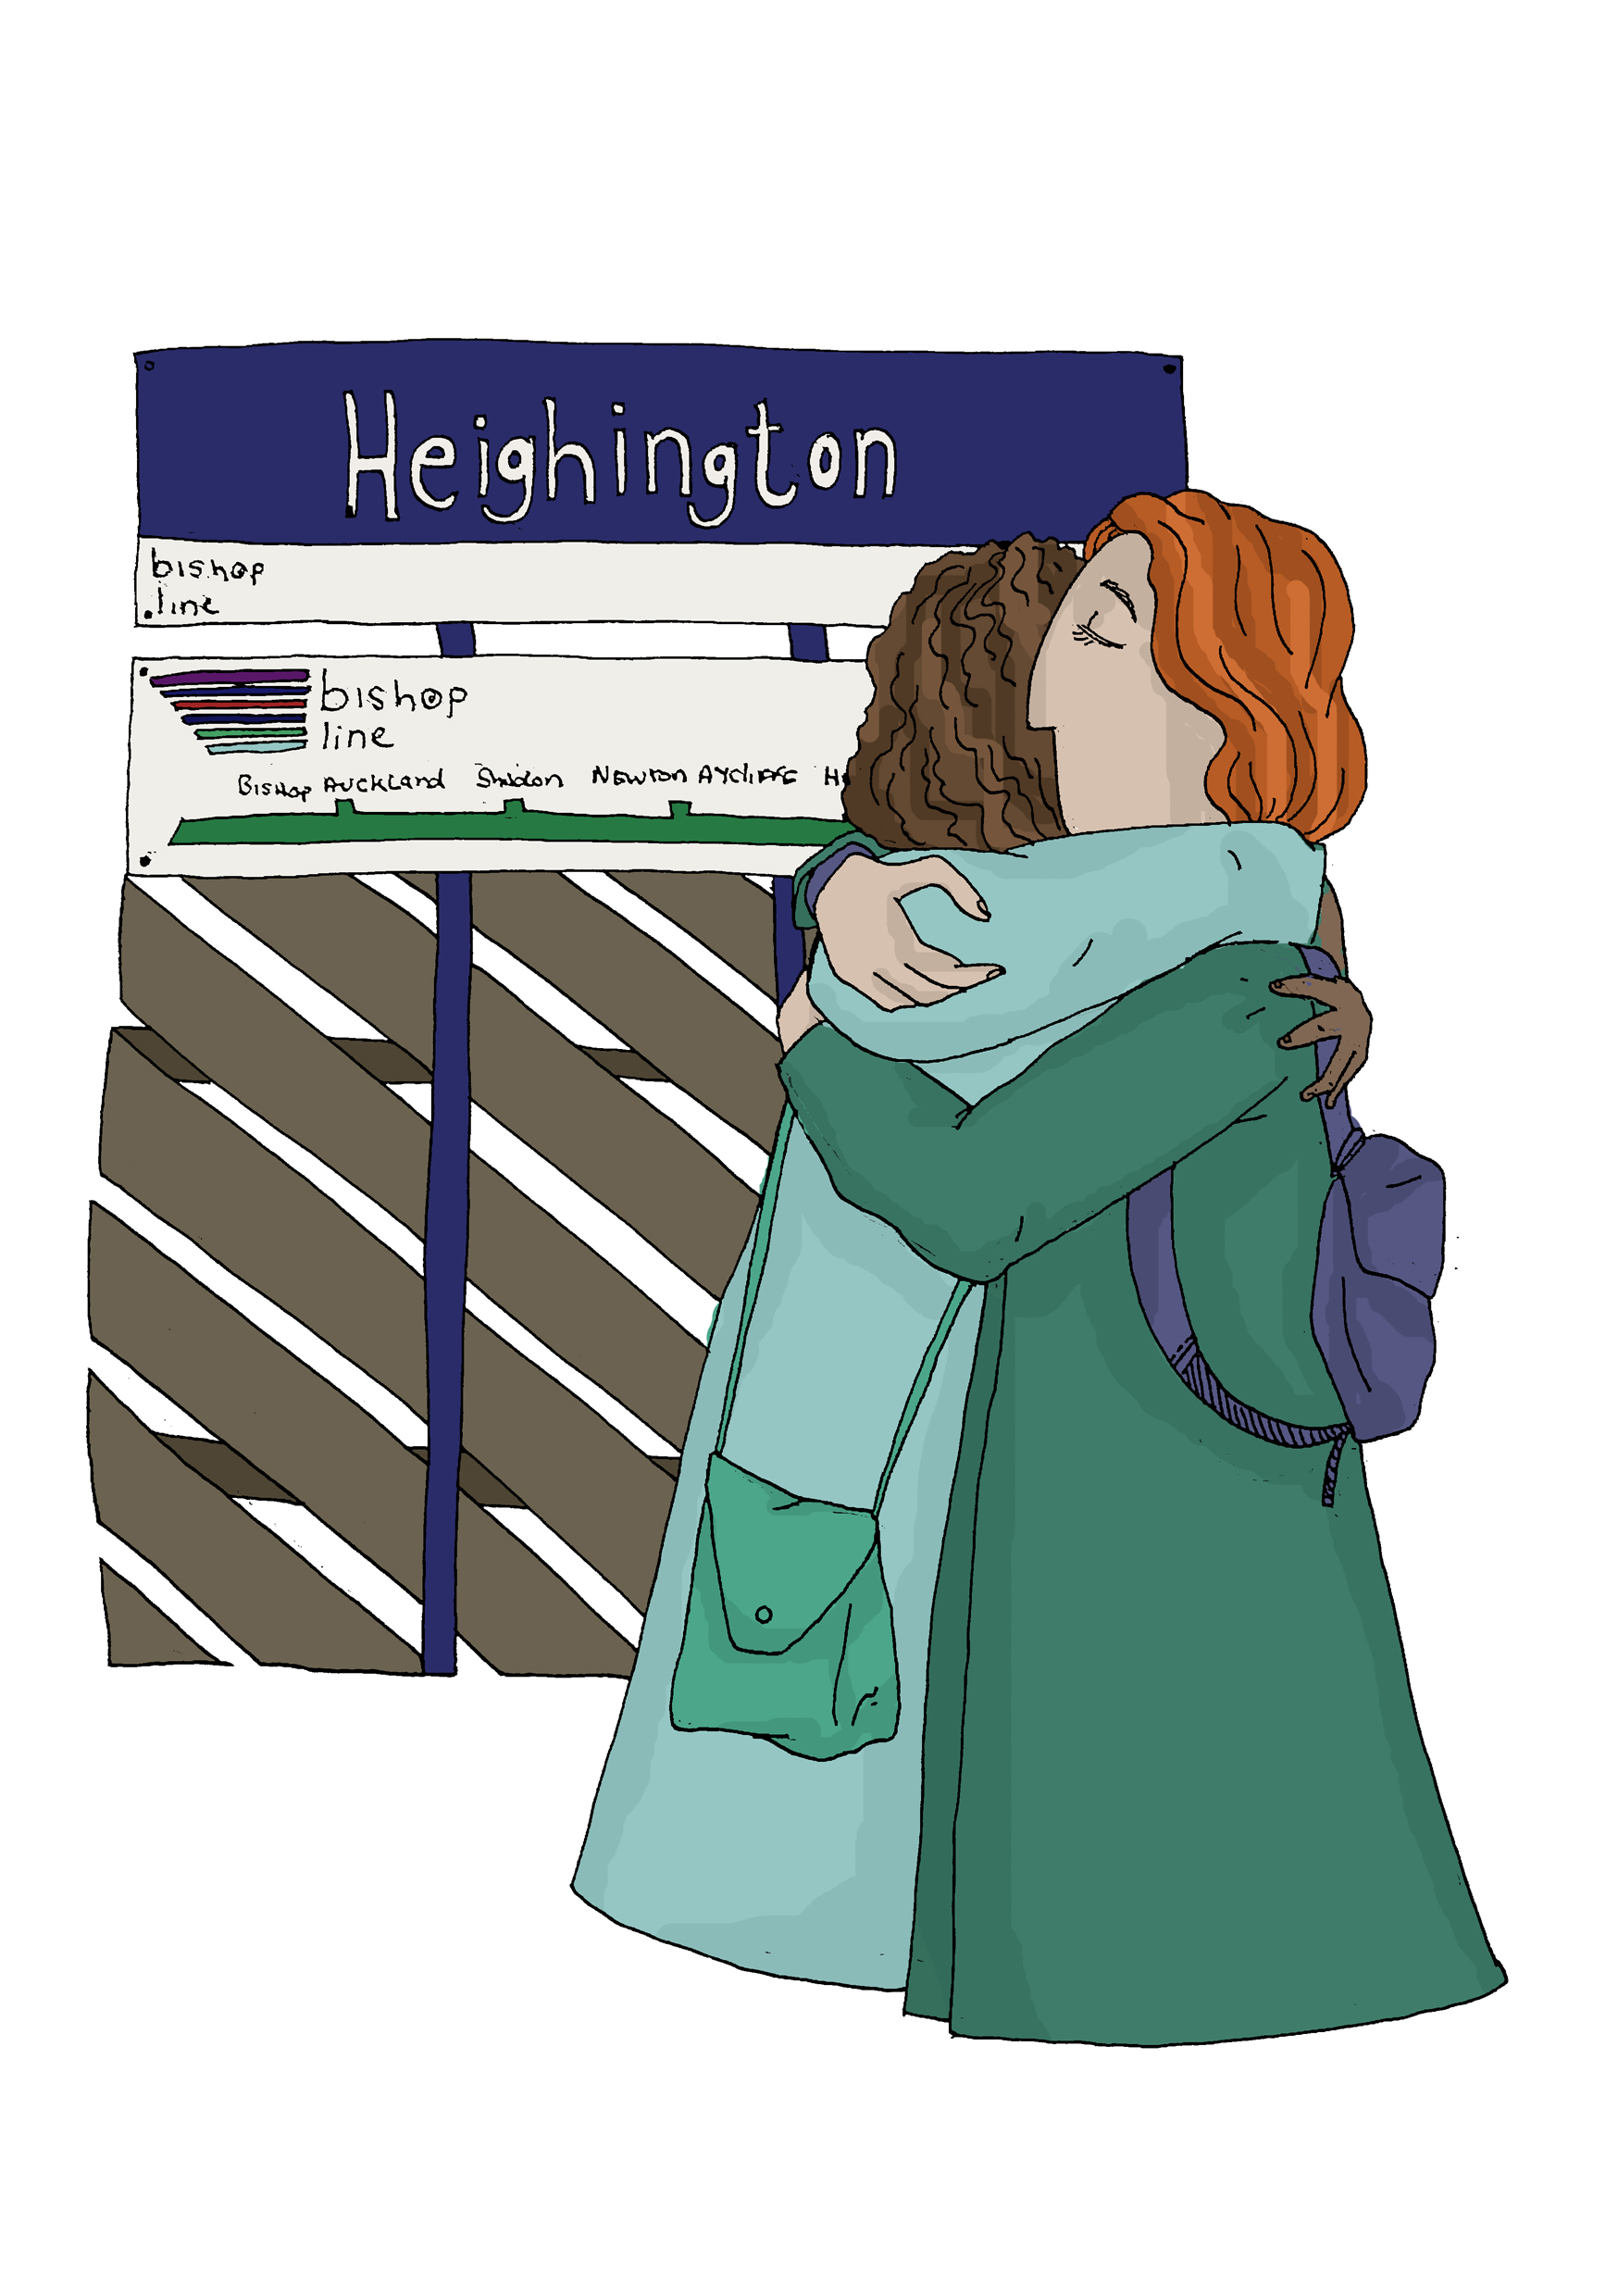 illustration of two people hugging at Heighington station